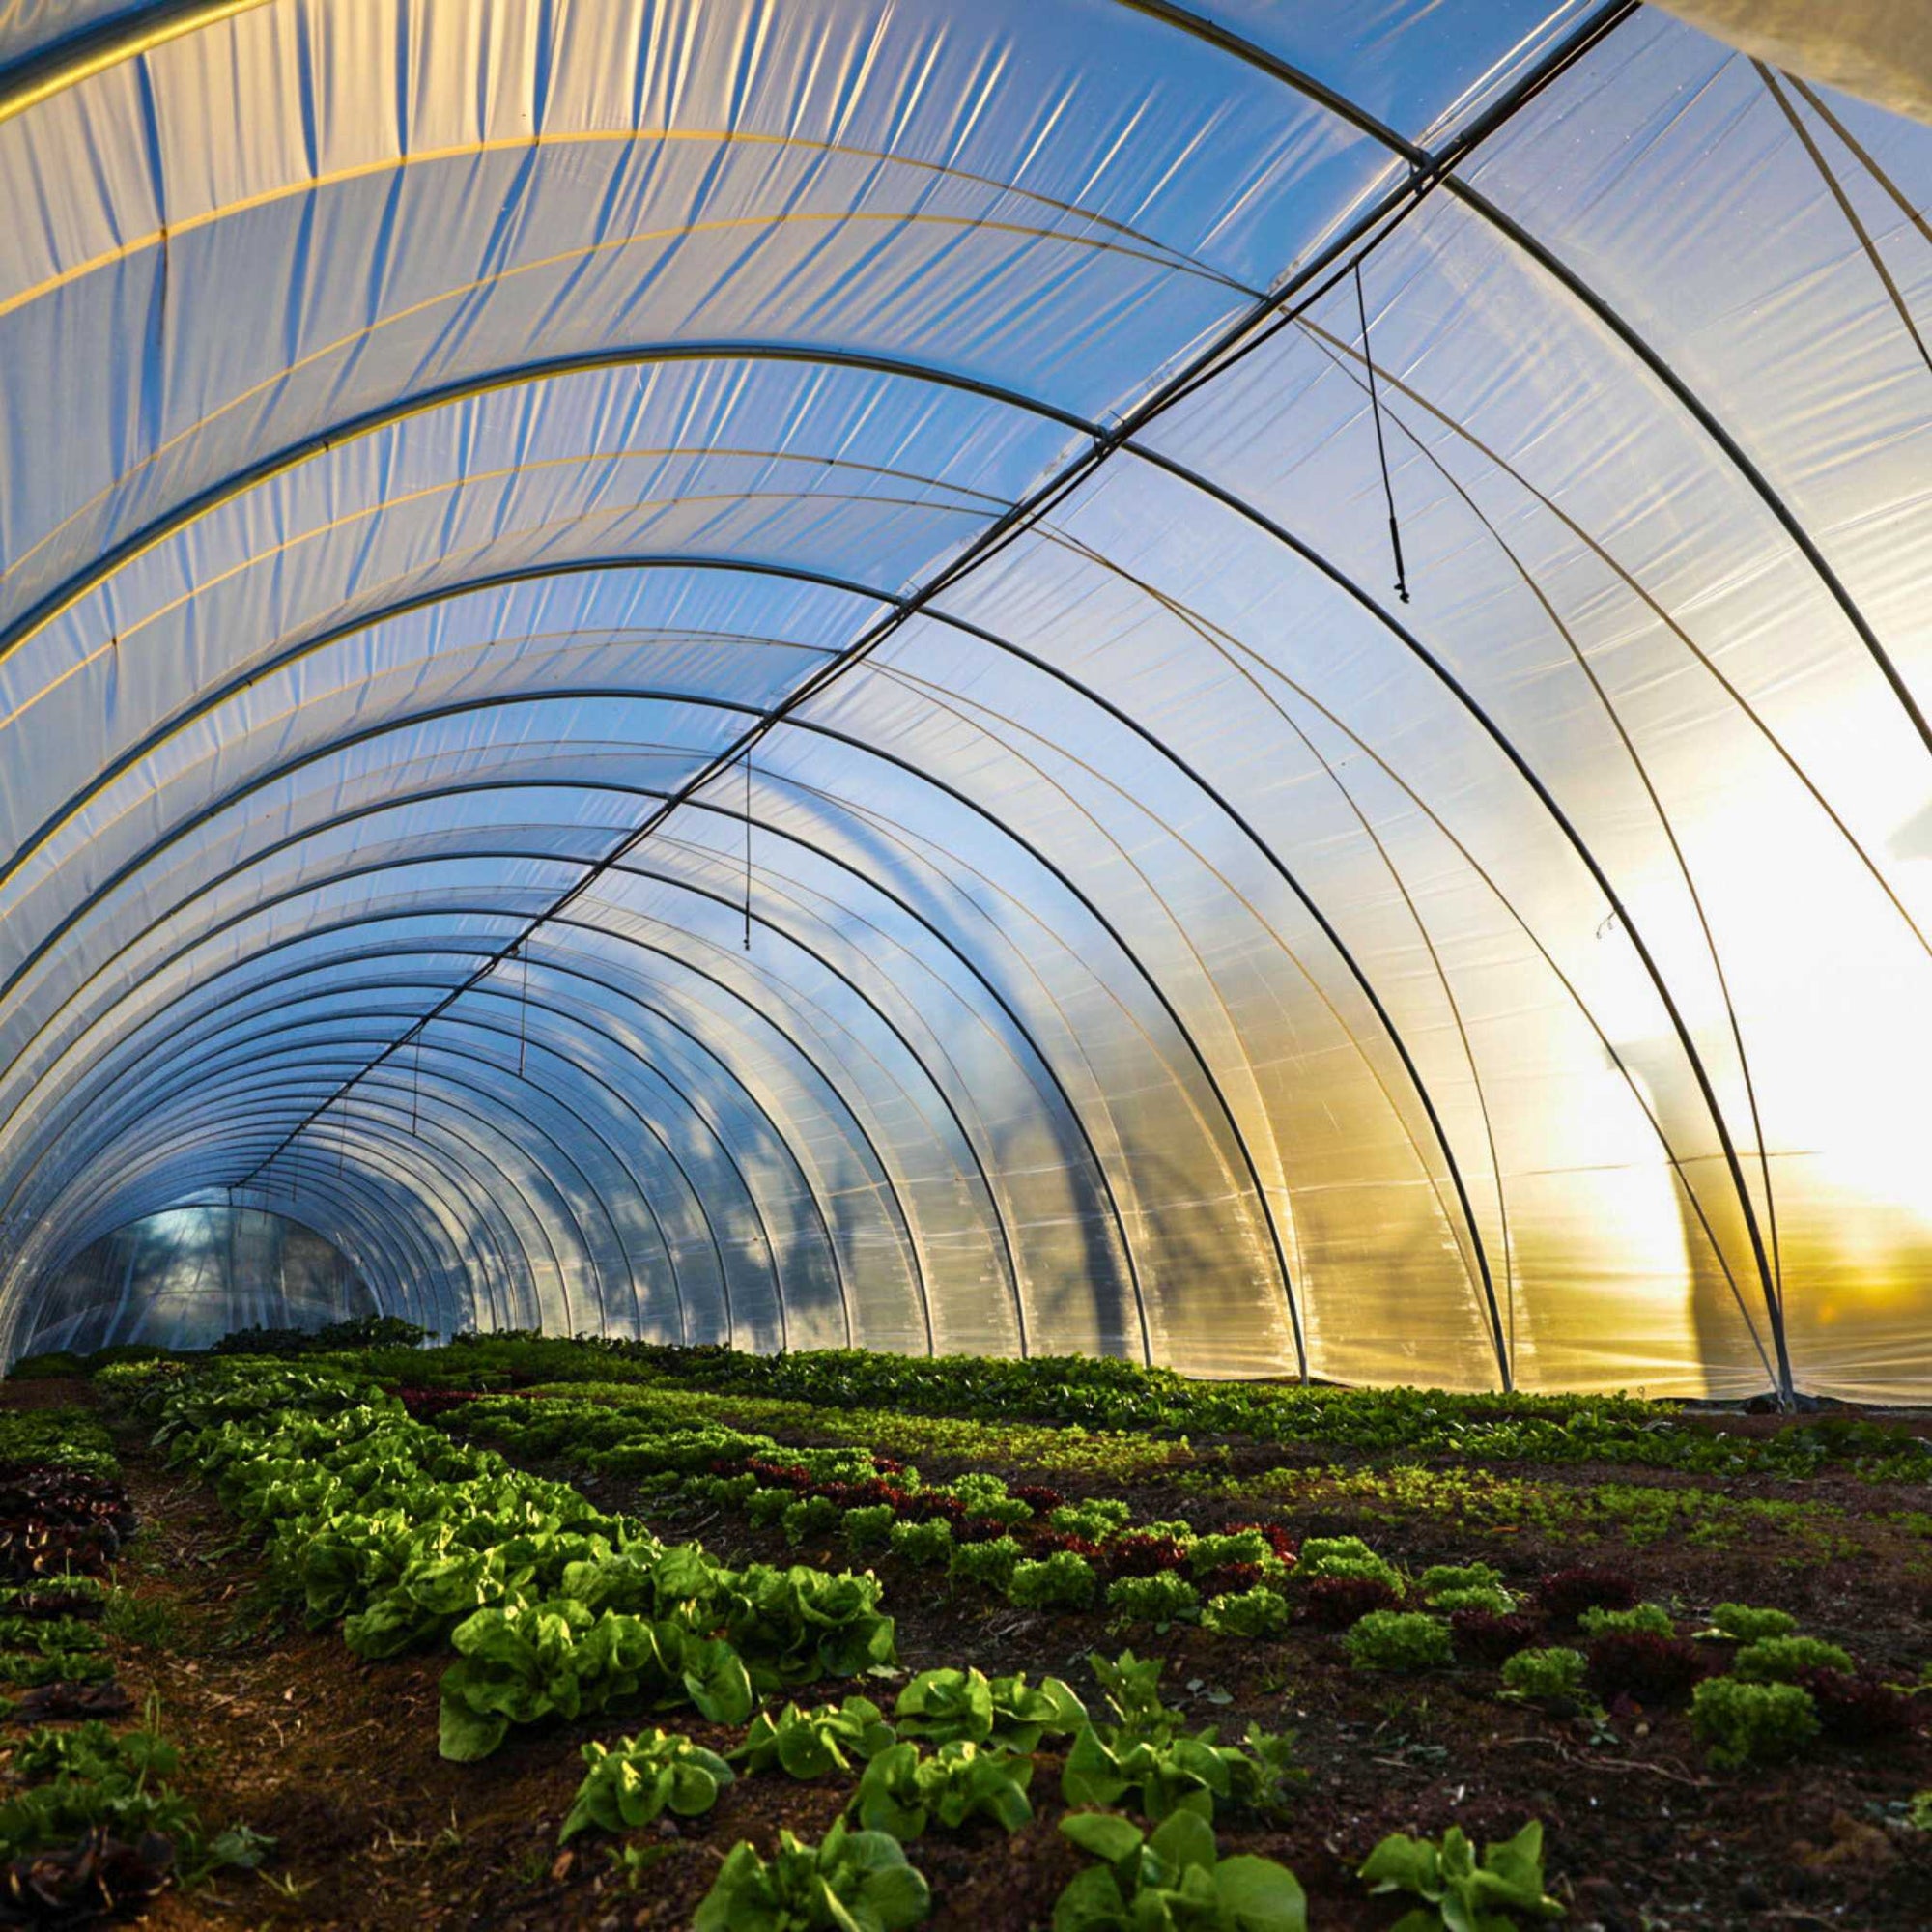 Inside view of a caterpillar tunnel with lush greens planted in rows